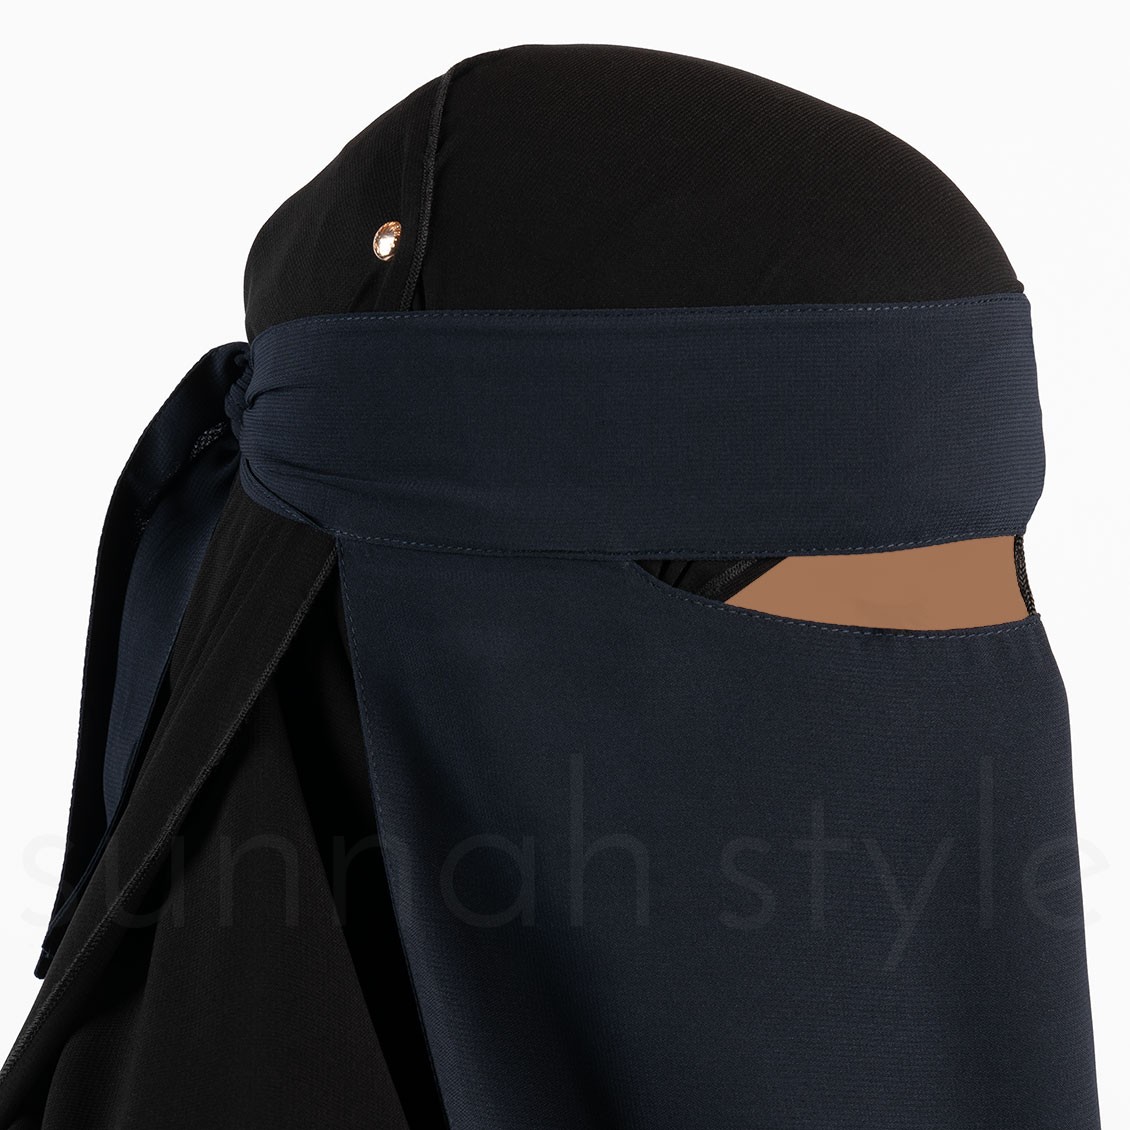 Sunnah Style One Layer Niqab w Nose String Navy Blue